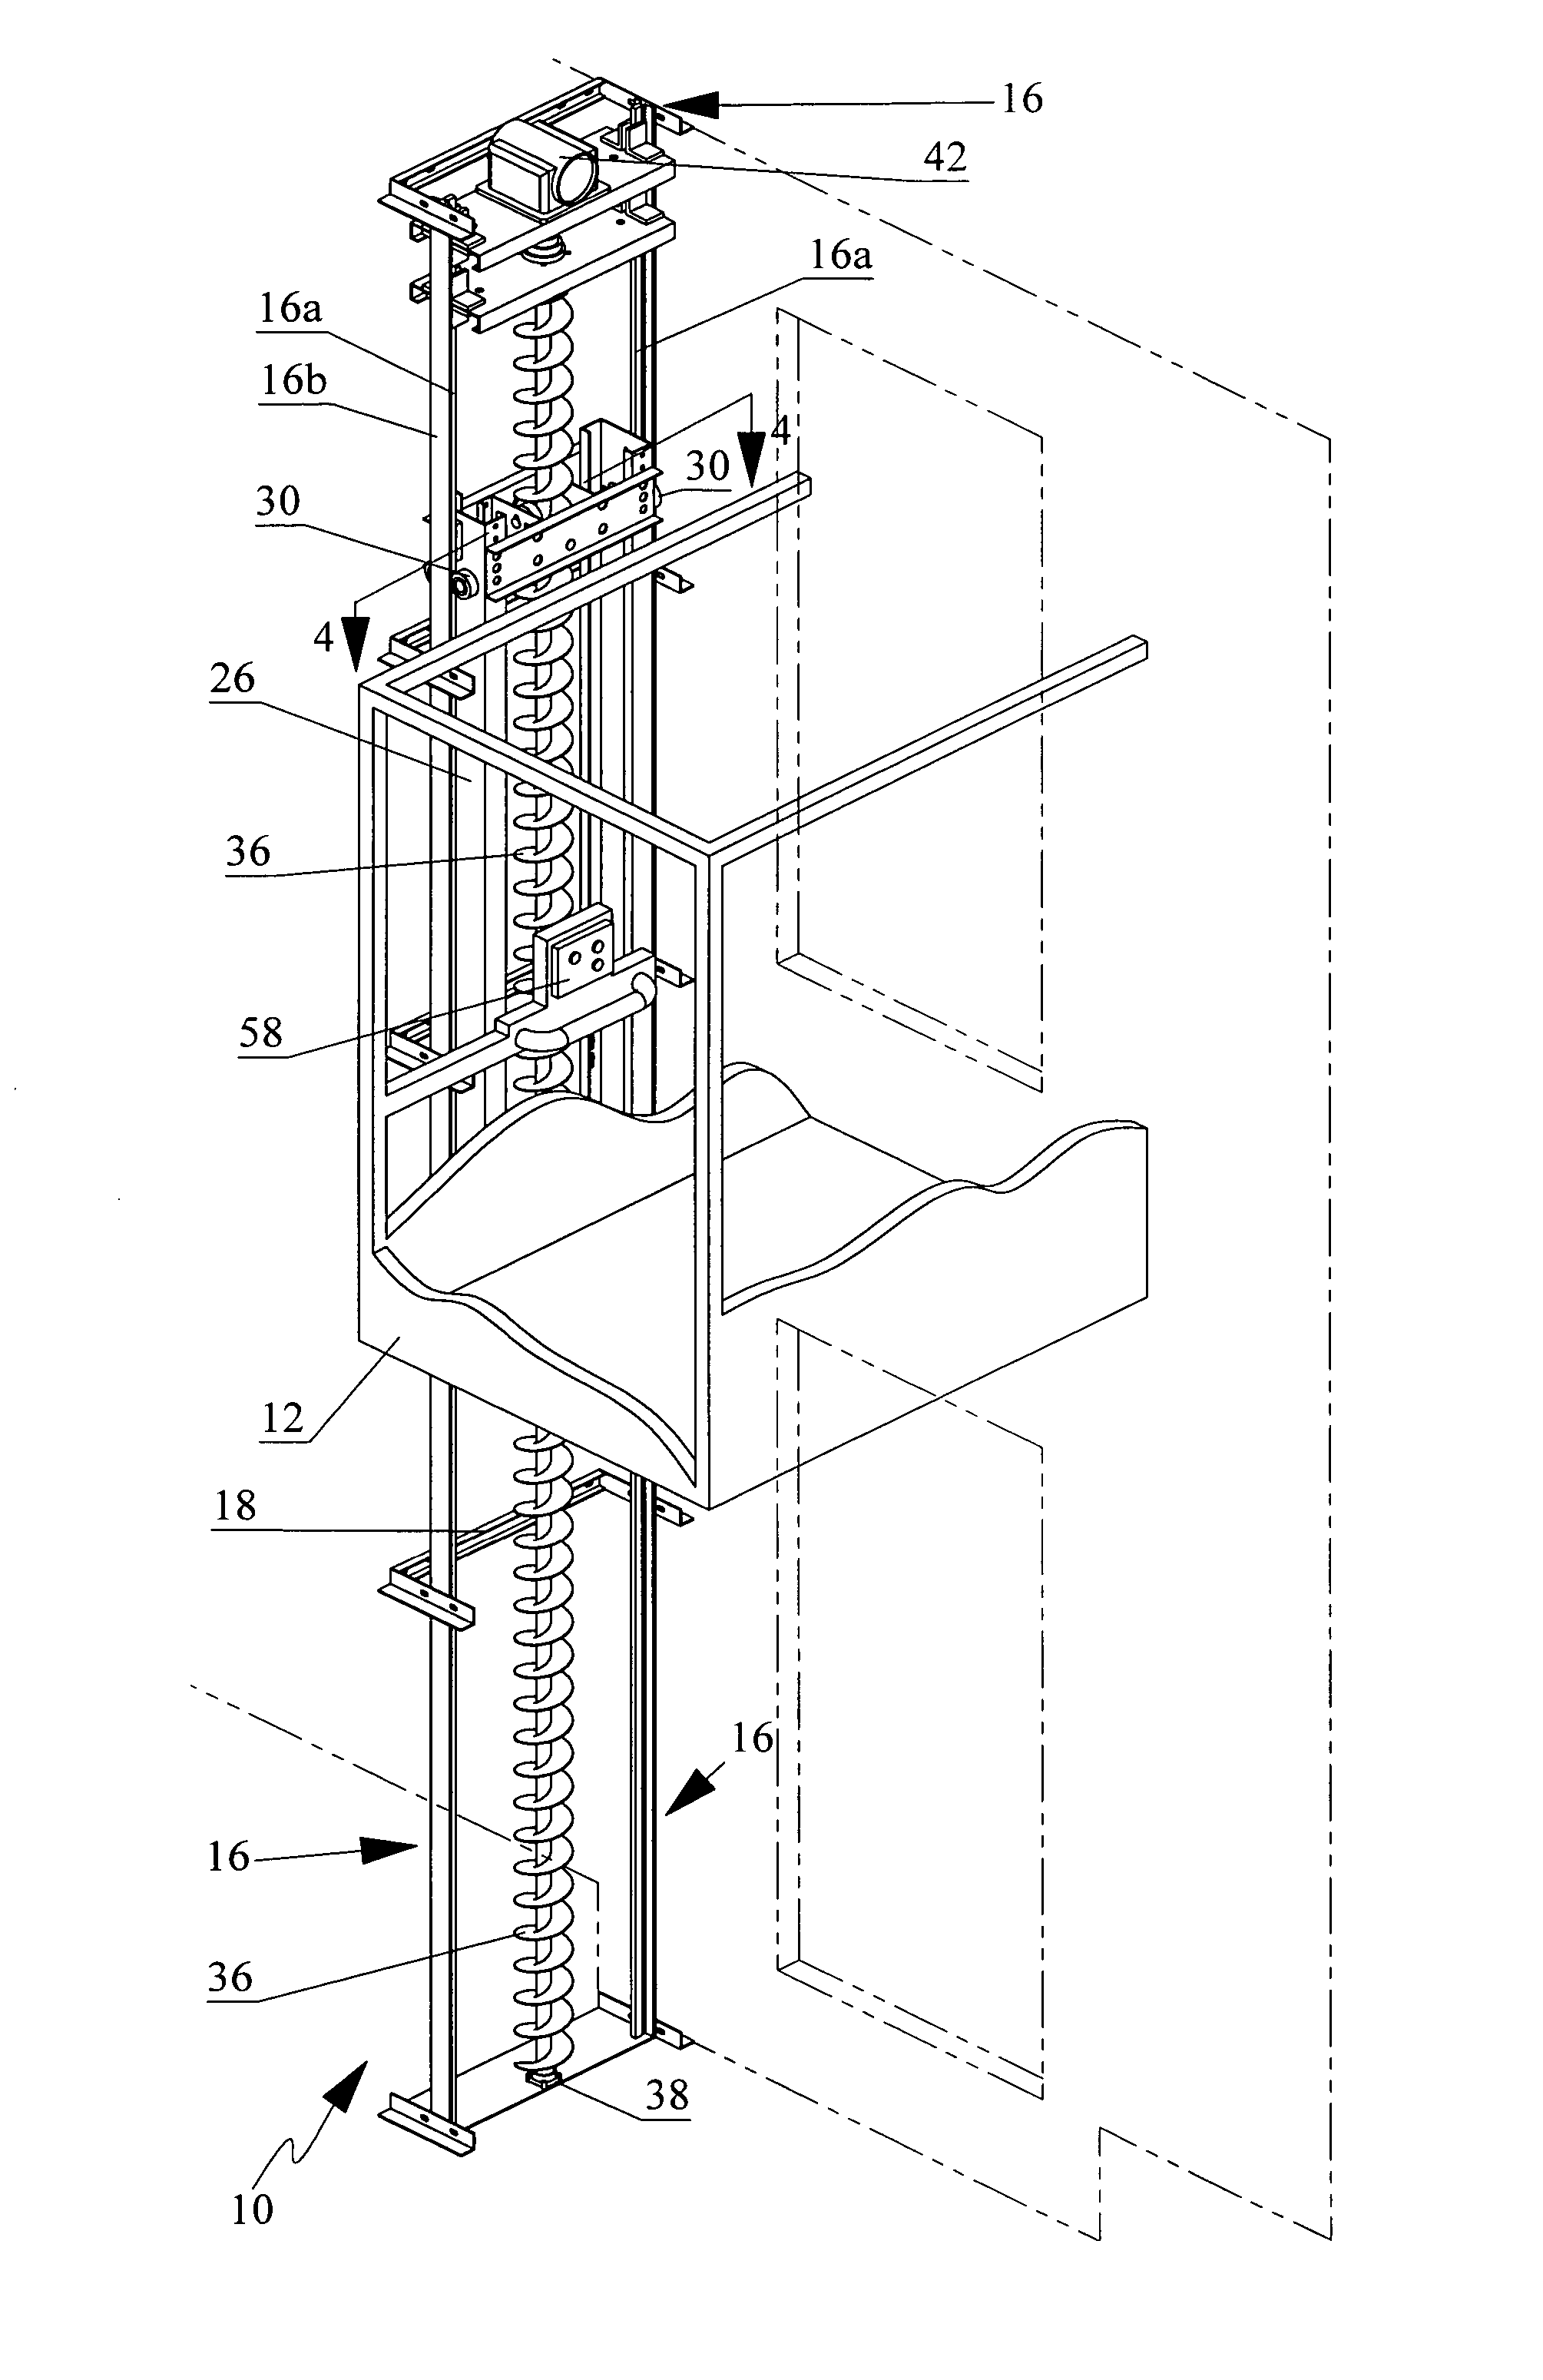 Helical screw lift system for an elevator